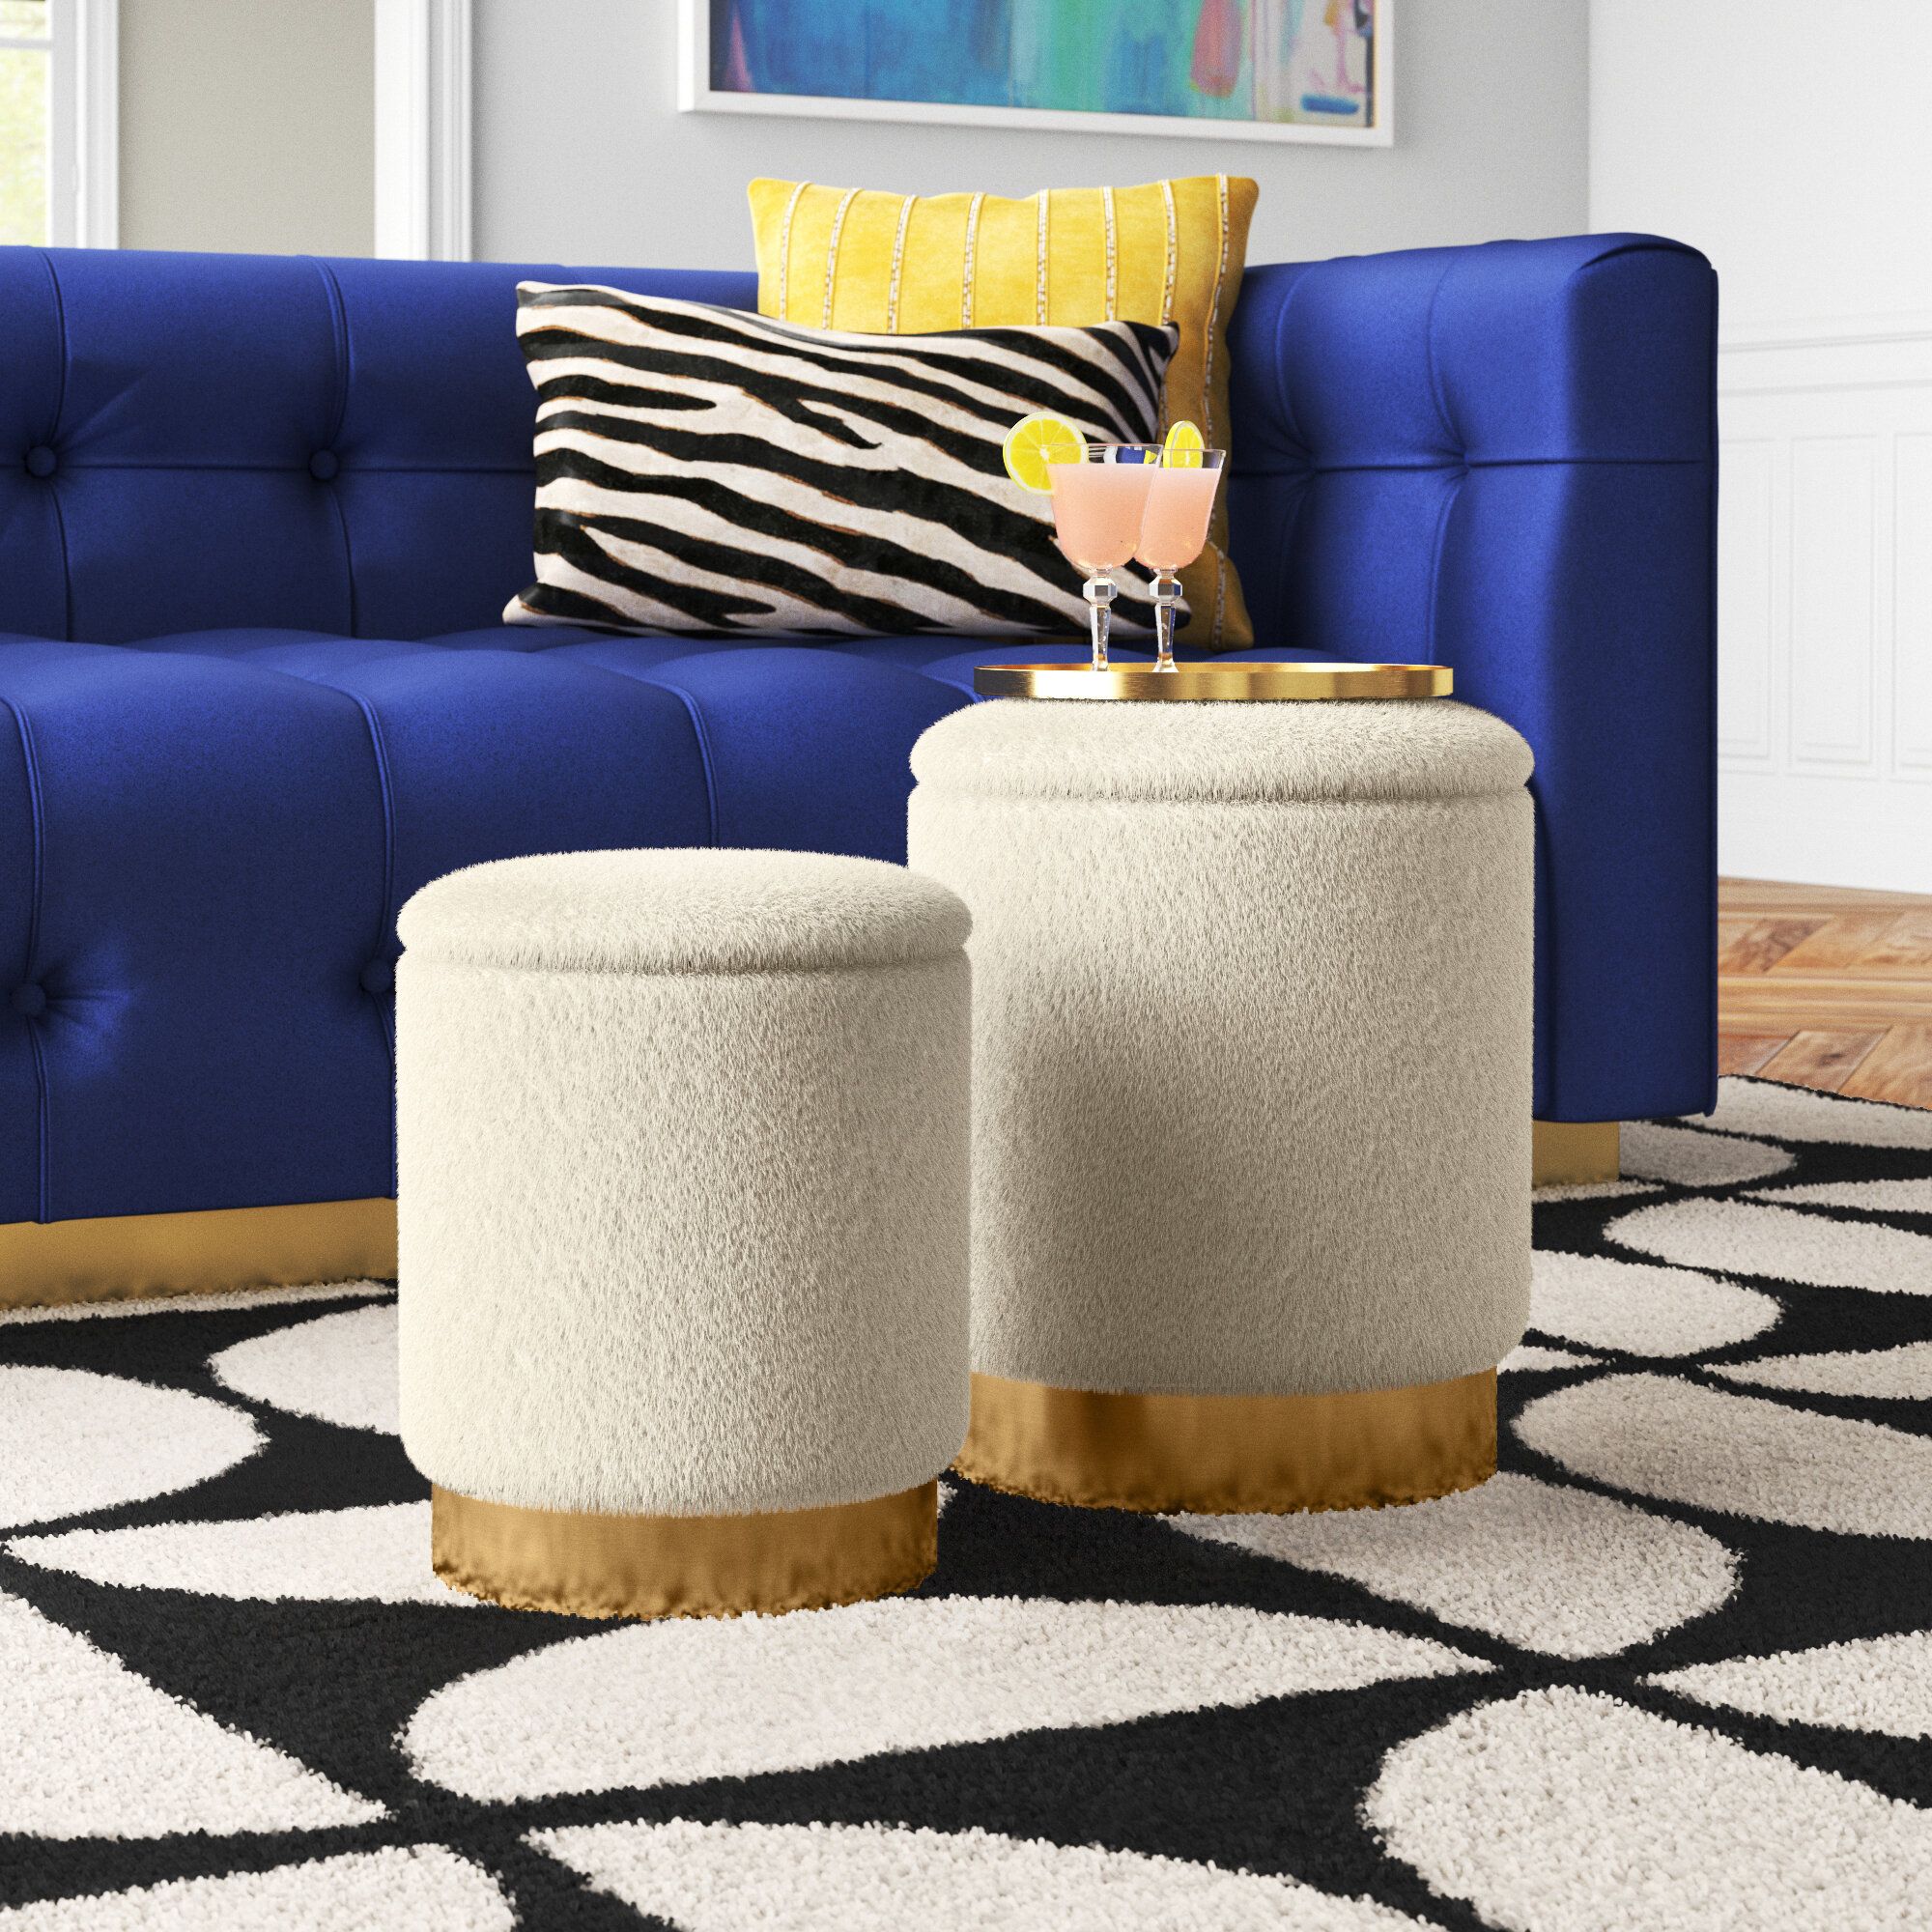 Etta Avenue™ Grayton Upholstered Storage Ottoman & Reviews | Wayfair Intended For Gold Storage Ottomans (View 9 of 15)